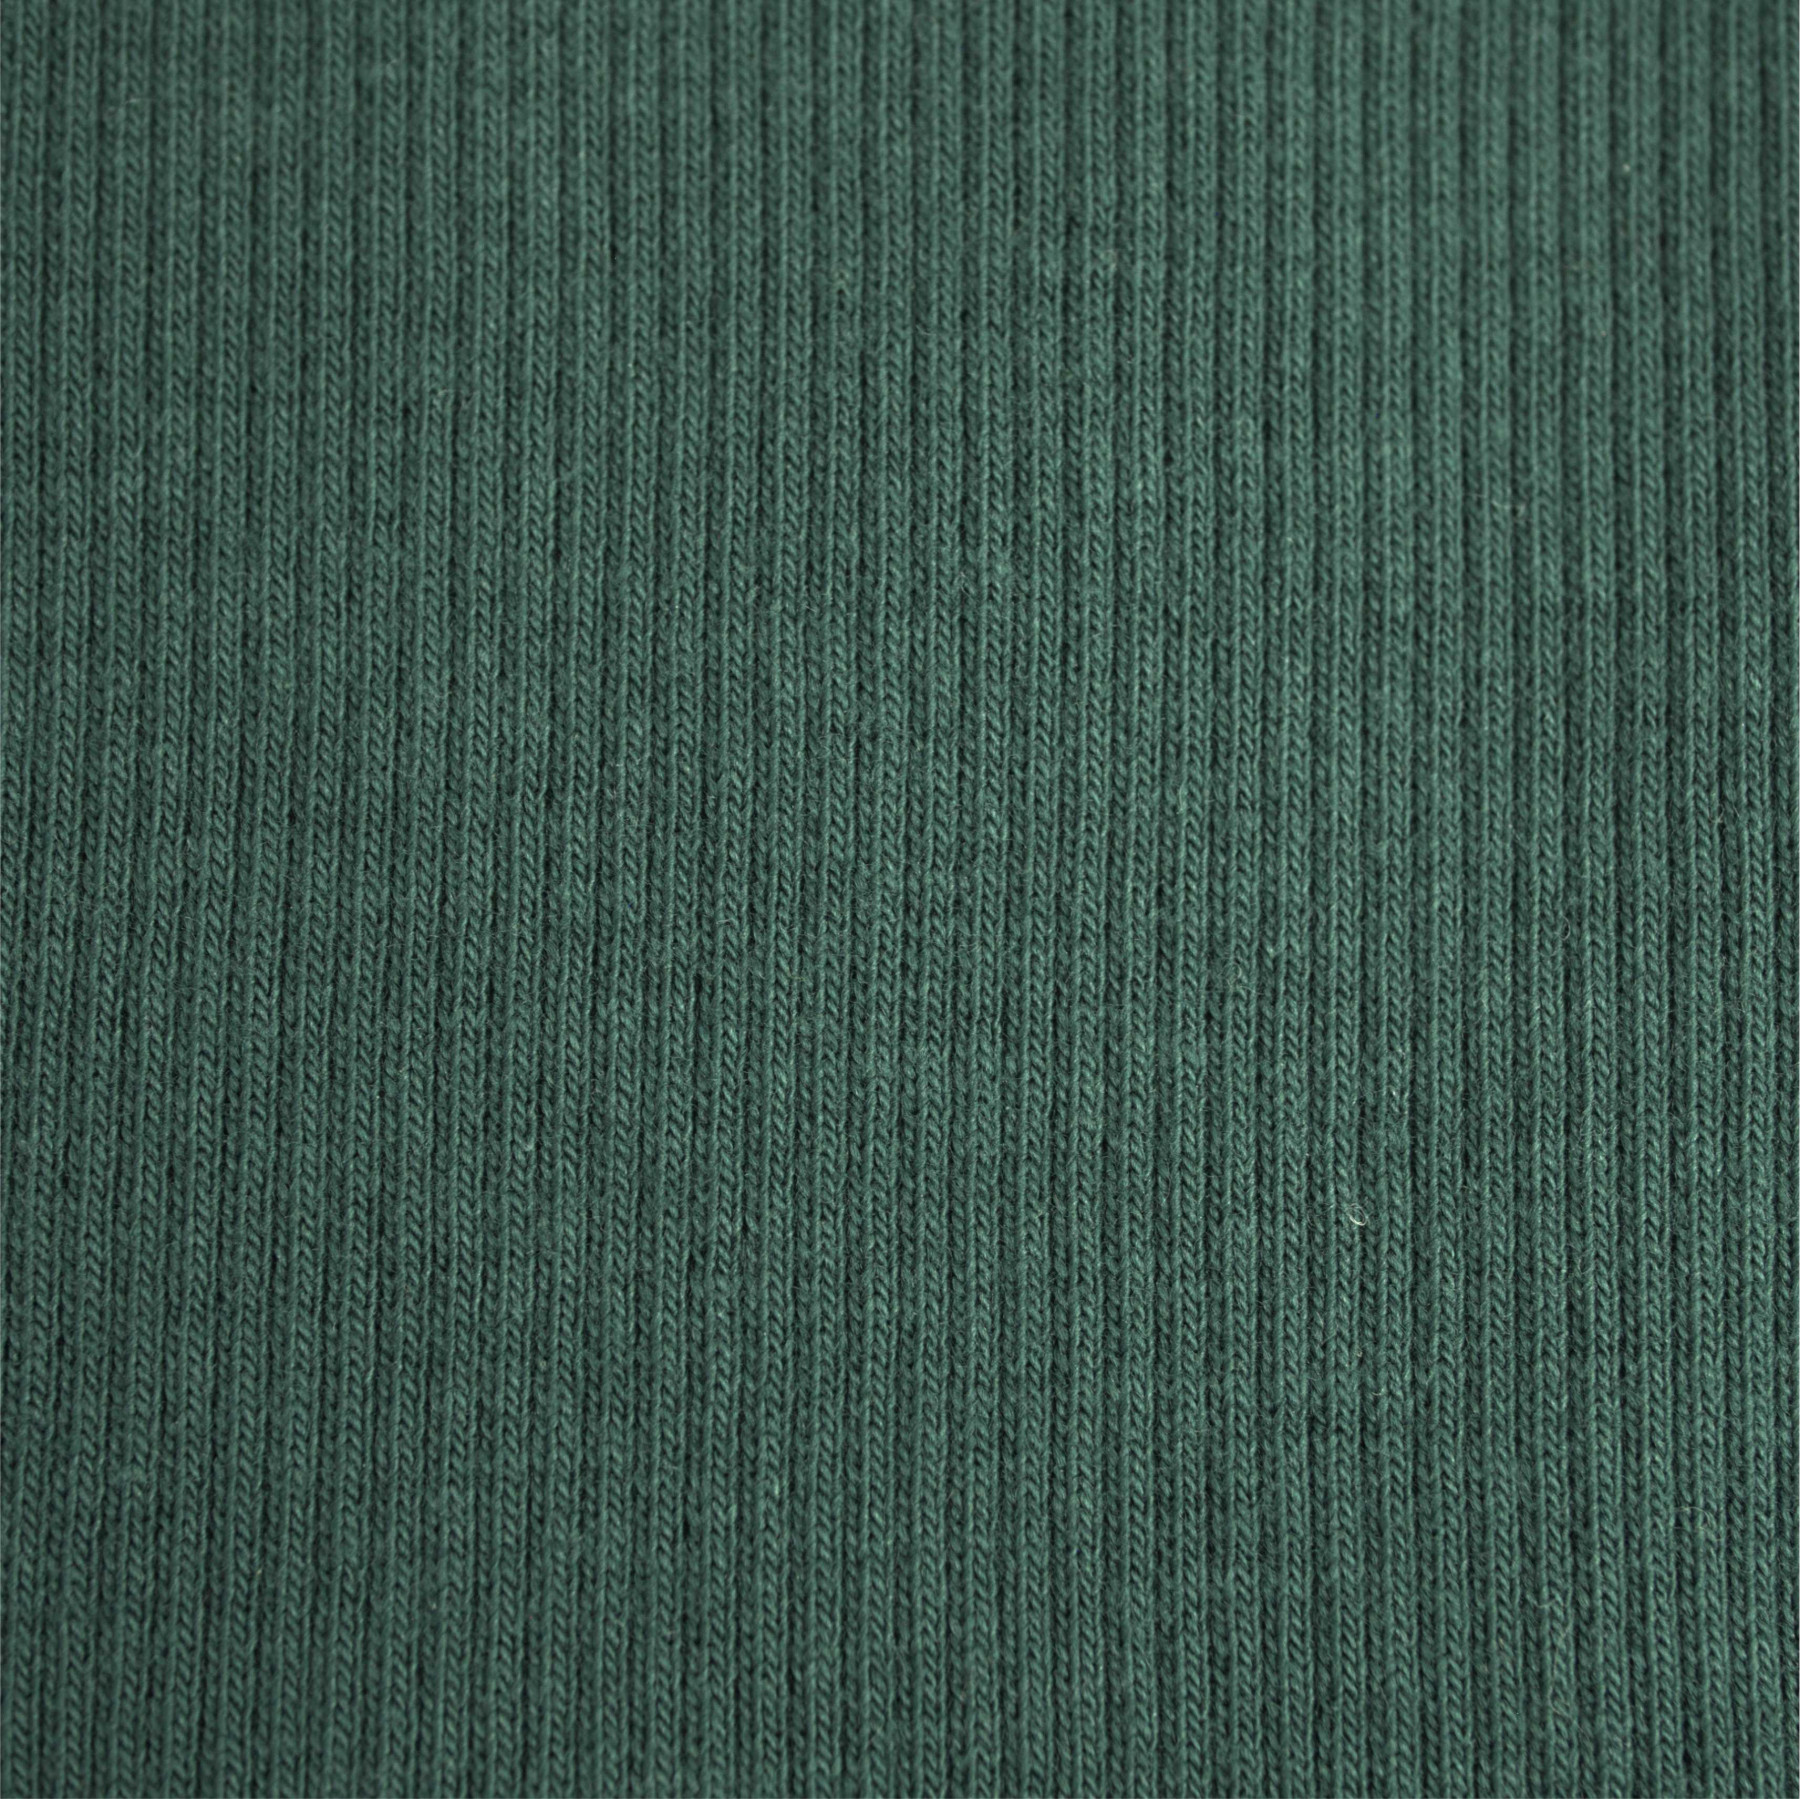 BOTTLE GREEN  - Ribbed knit fabric